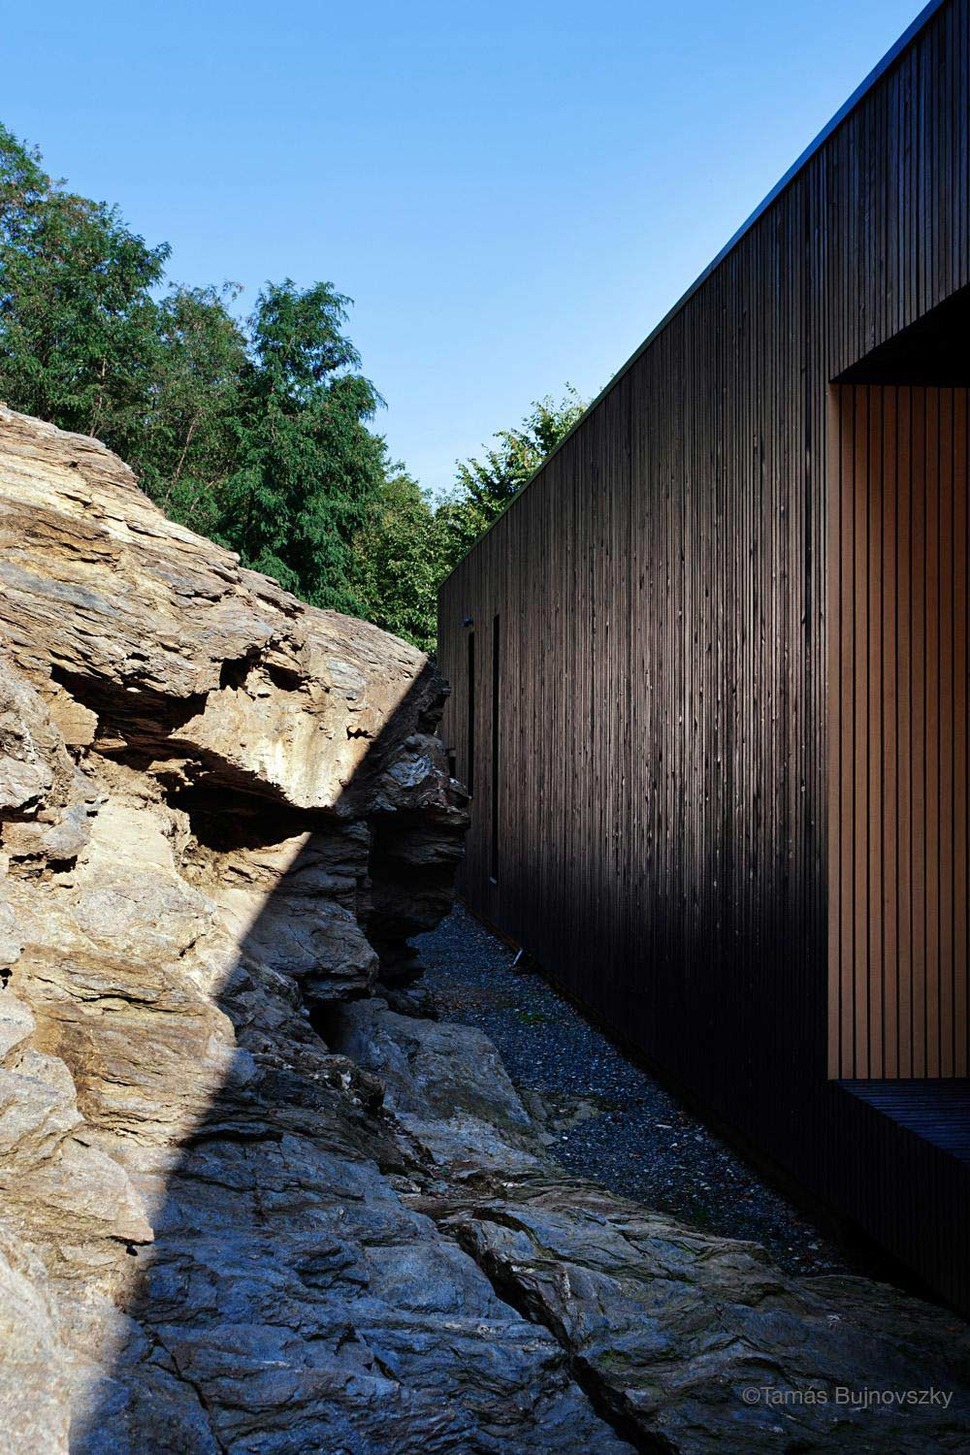 timber-cabin-built-into-cliff-side-site-7.jpg